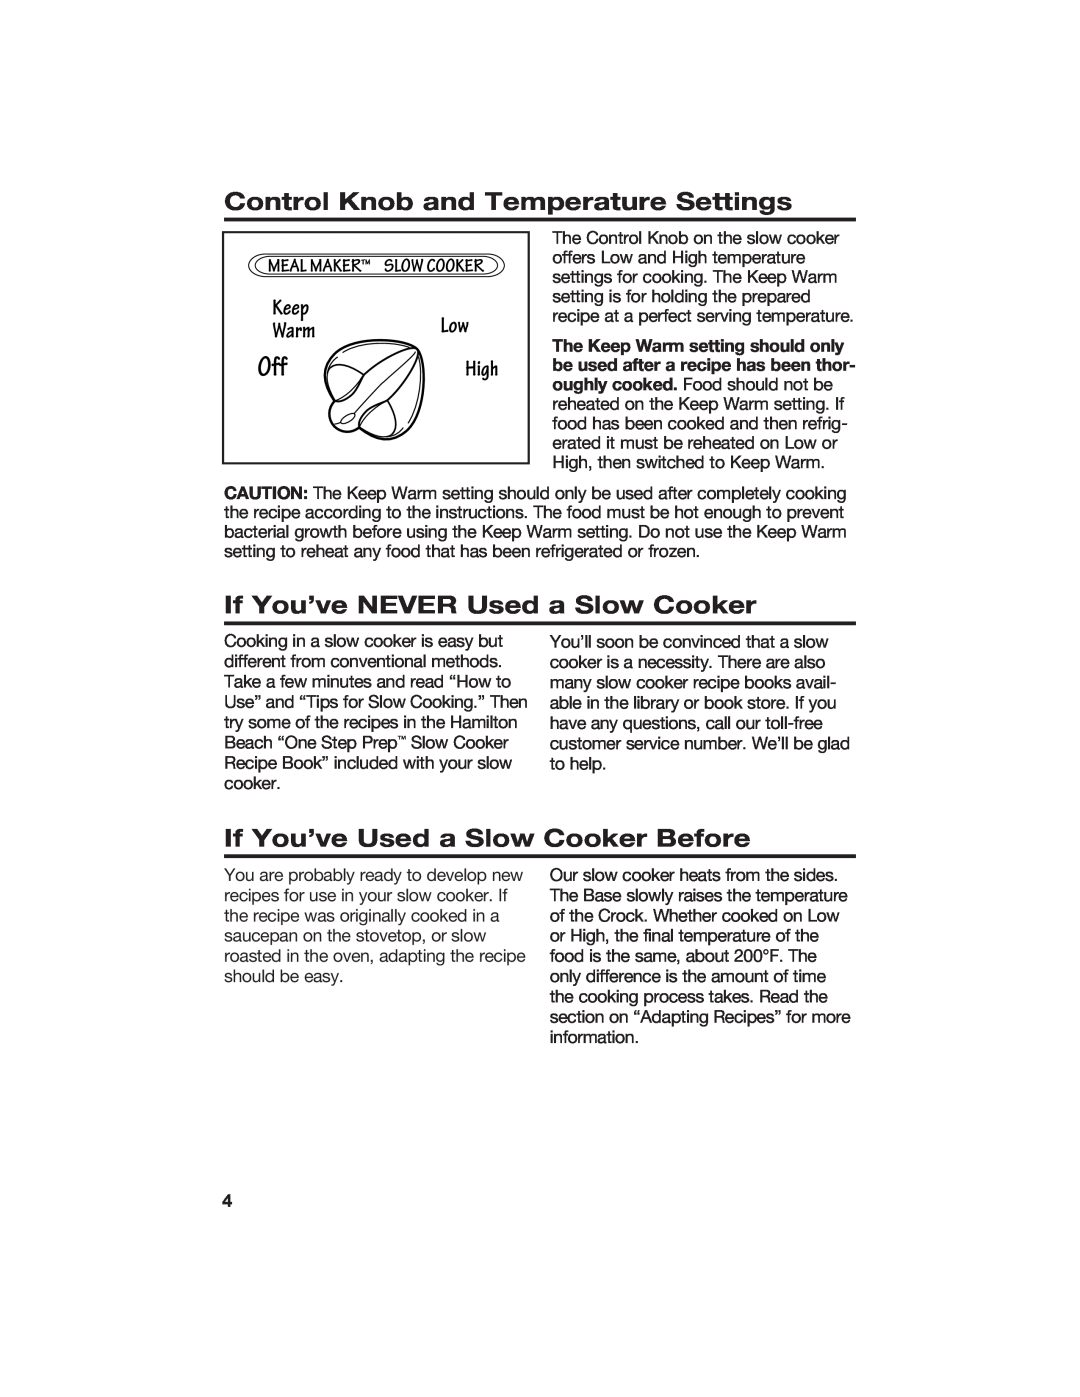 Hamilton Beach 840056100 manual Control Knob and Temperature Settings, If You’ve NEVER Used a Slow Cooker 